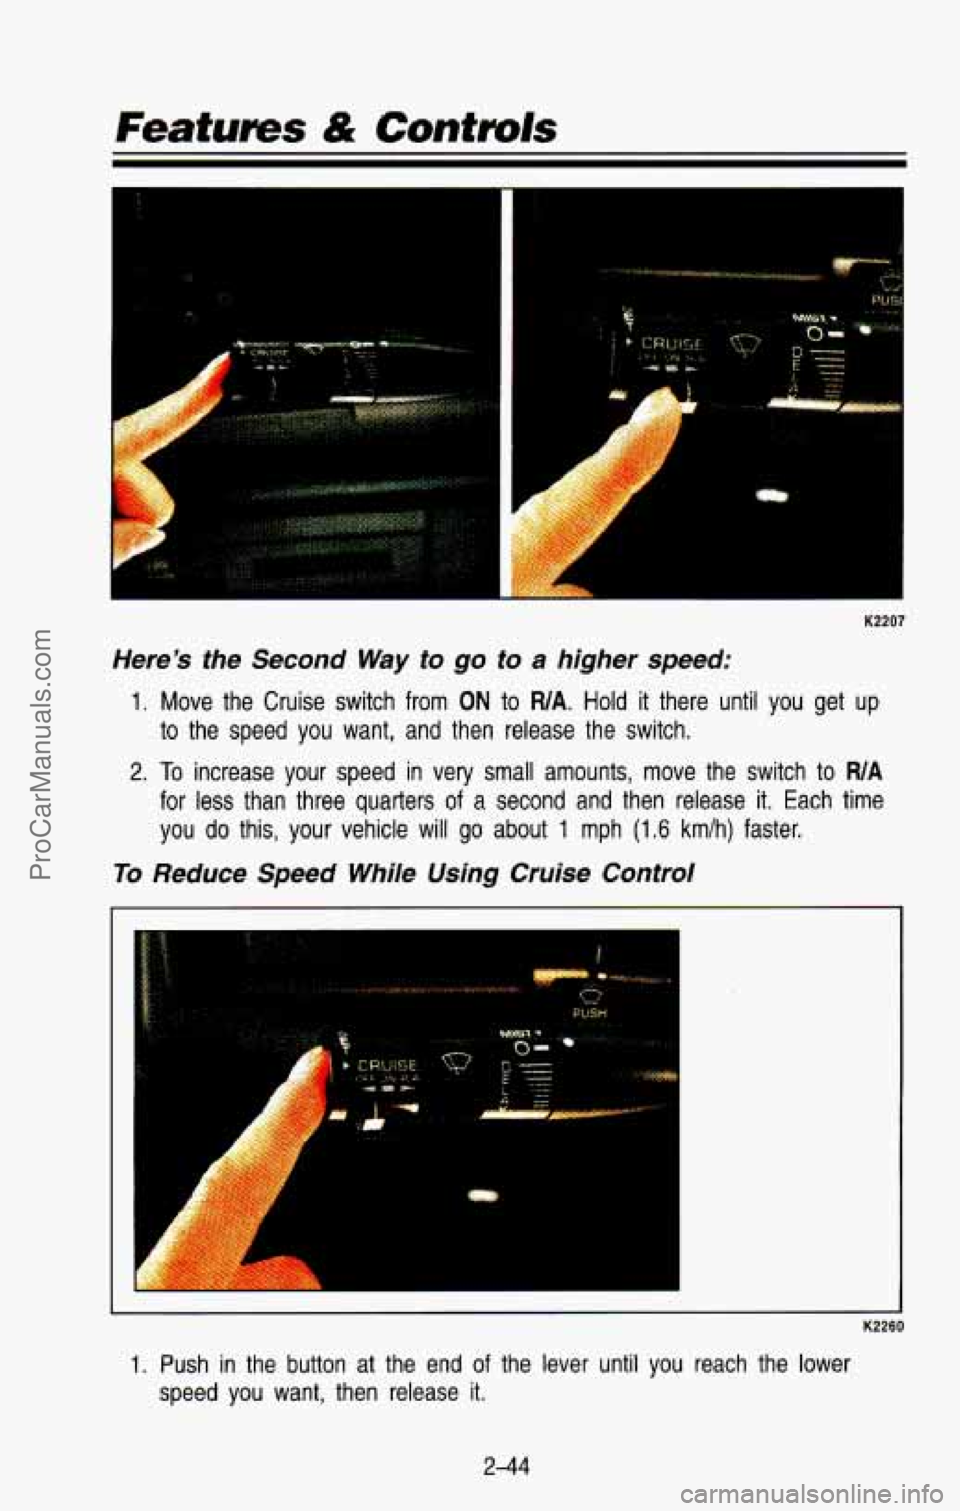 CHEVROLET SUBURBAN 1993  Owners Manual Features & Controls 
i 
K2207 
Heres  the  Second Way to go to a higher  speed: 
1. Move the Cruise  switch  from ON to WA. Hold  it there  until  you  get  up 
to the  speed  you  want,  and  then  